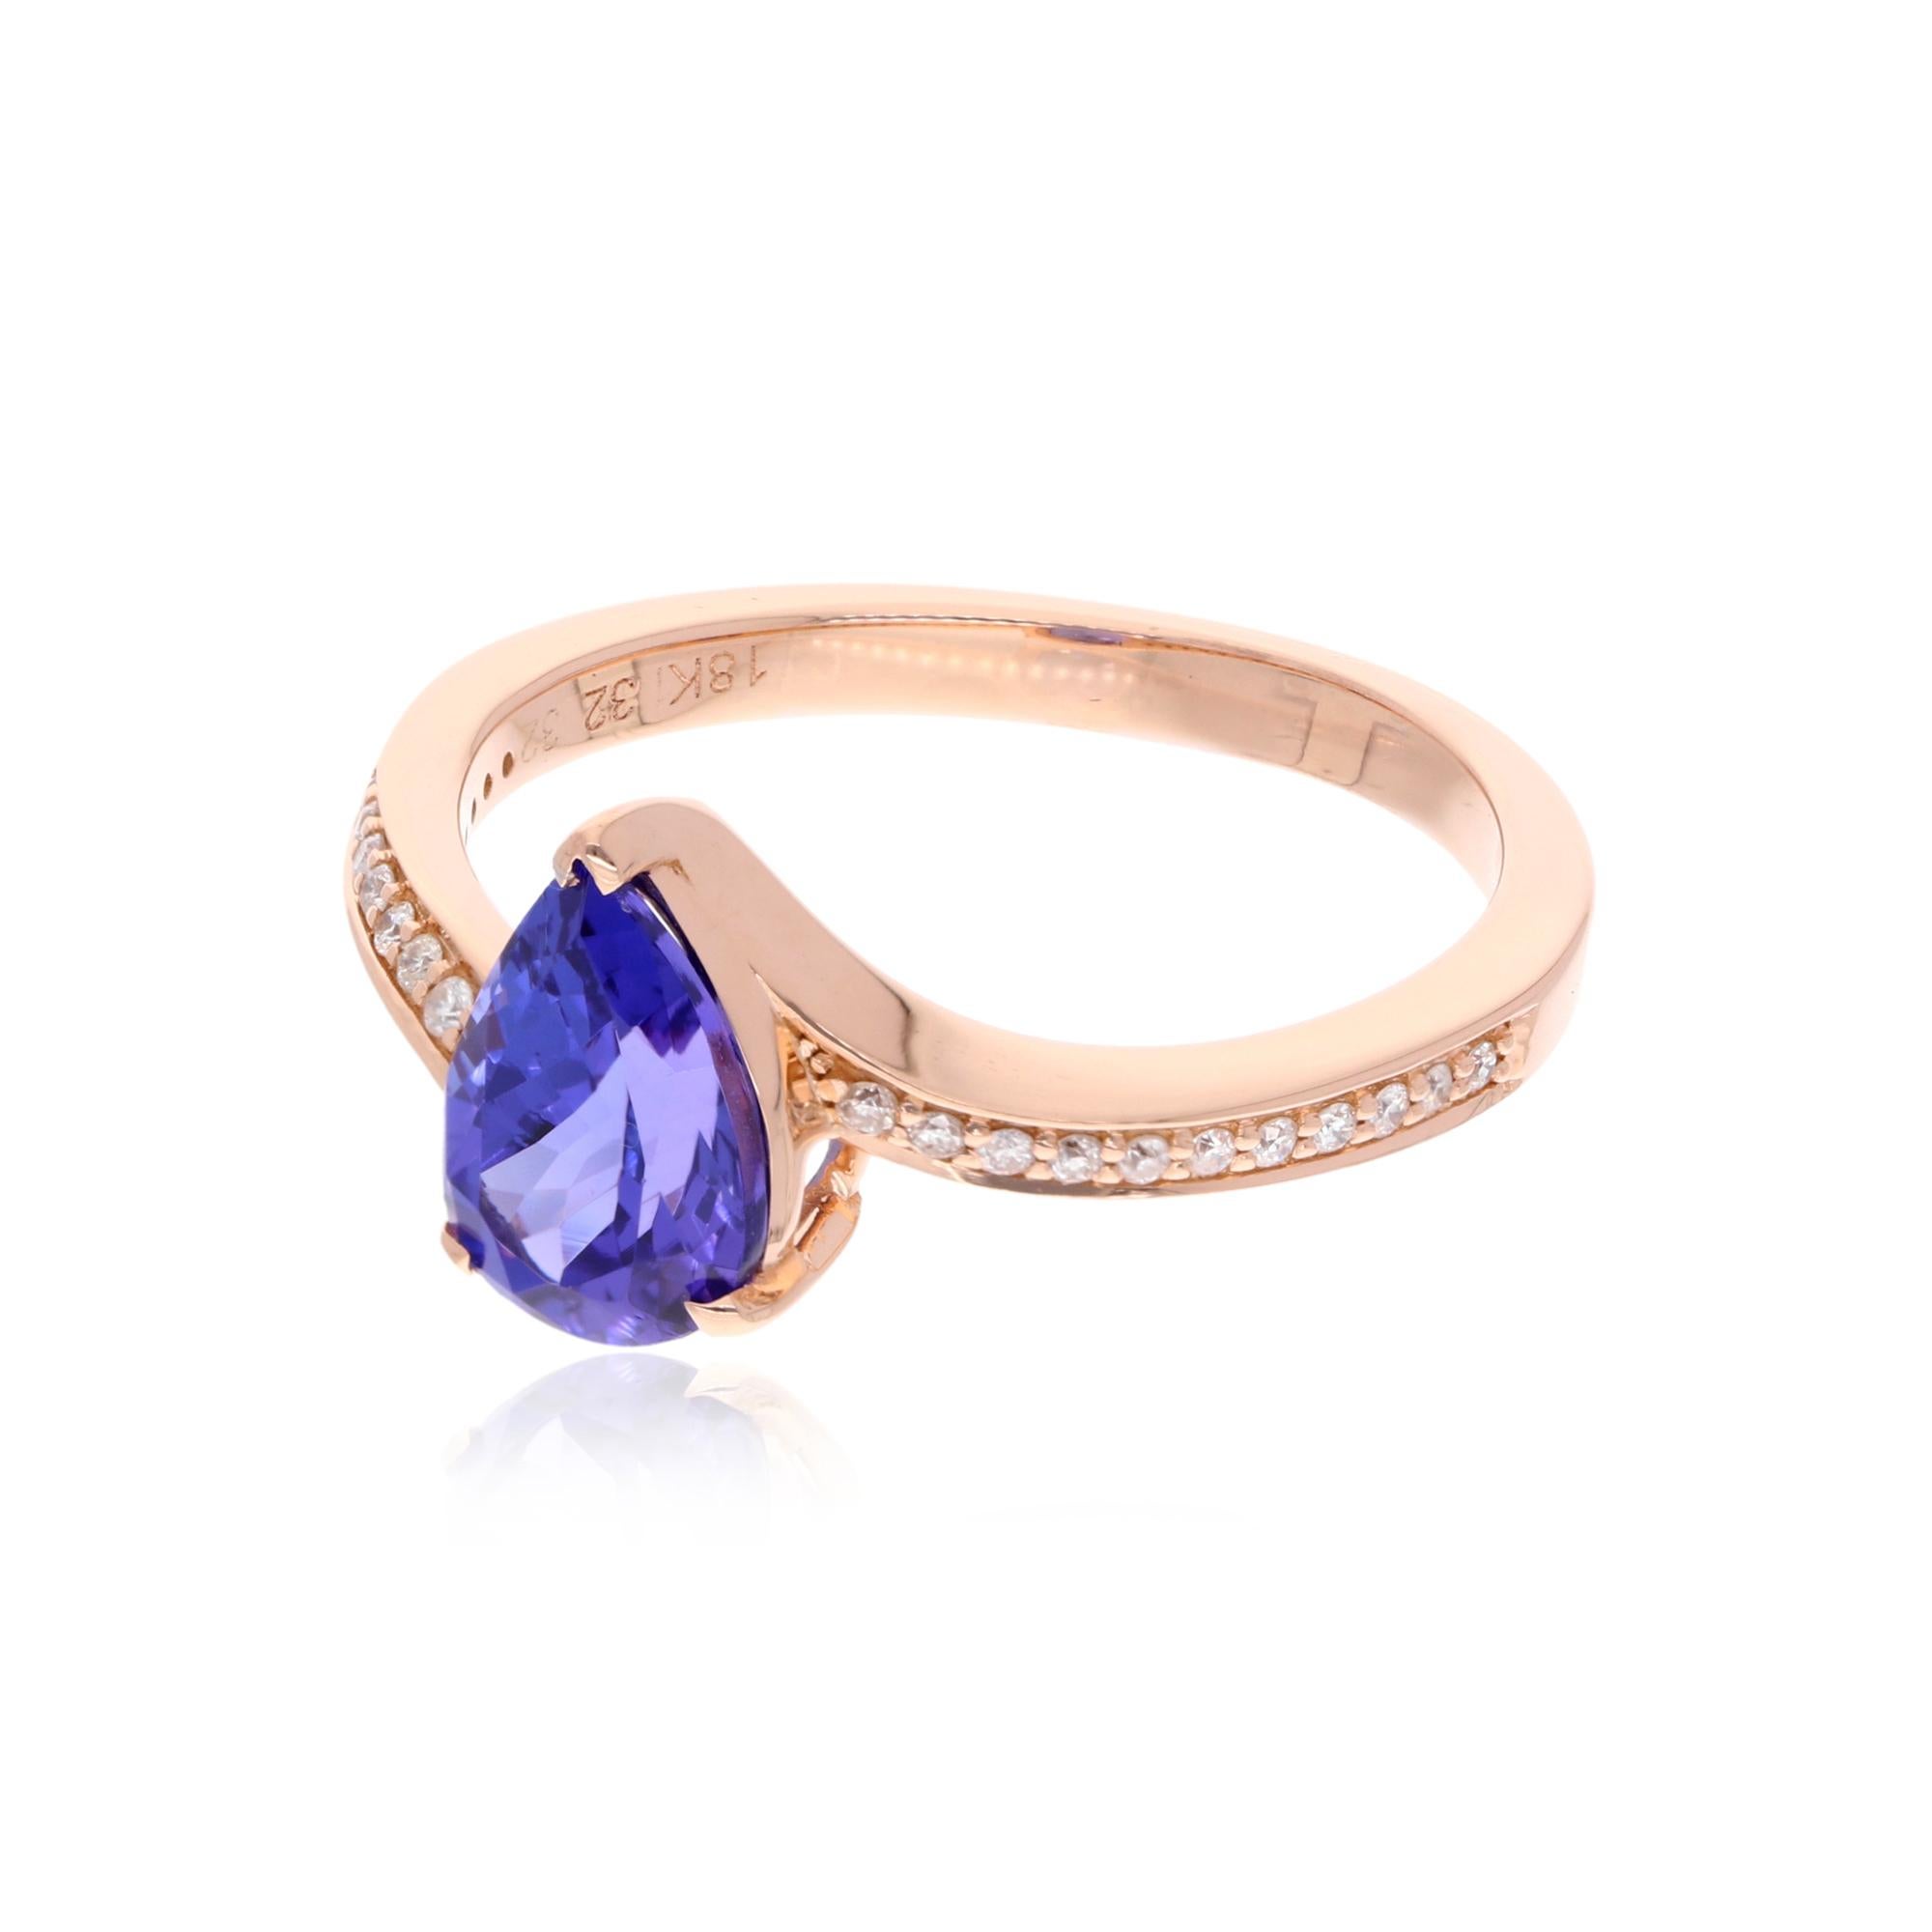 Item Code :- SER-22359
Gross Weight :- 3.76 gm
18k Rose Gold Weight :- 3.42 gm
Natural Diamond Weight :- 0.10 Carat ( AVERAGE DIAMOND CLARITY SI1-SI2 & COLOR H-I )
Tanzanite Weight :- 1.58 Carat
Ring Size:- 7 US & All size available

✦